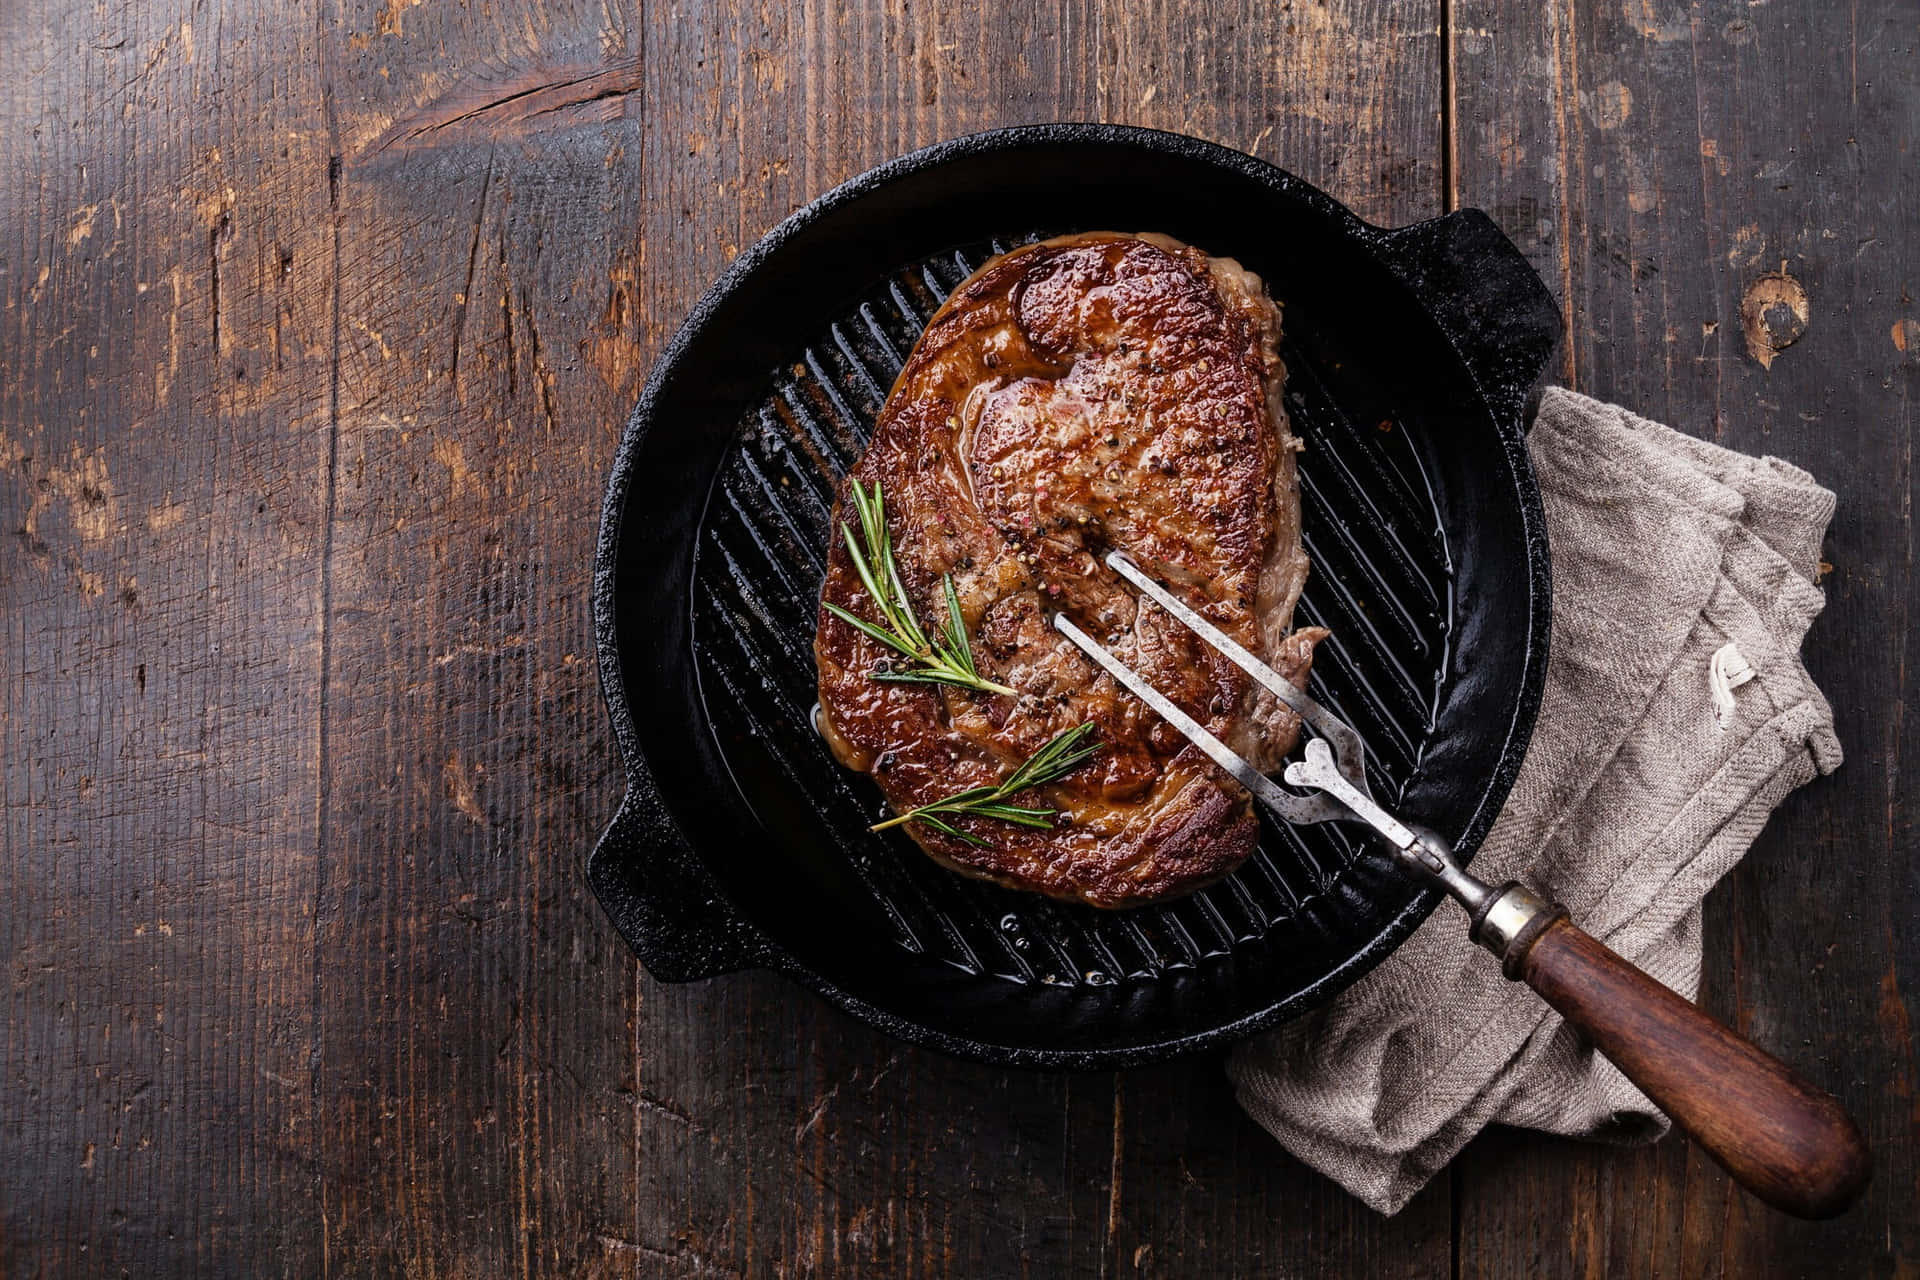 A Steak Is Being Cooked In A Cast Iron Skillet